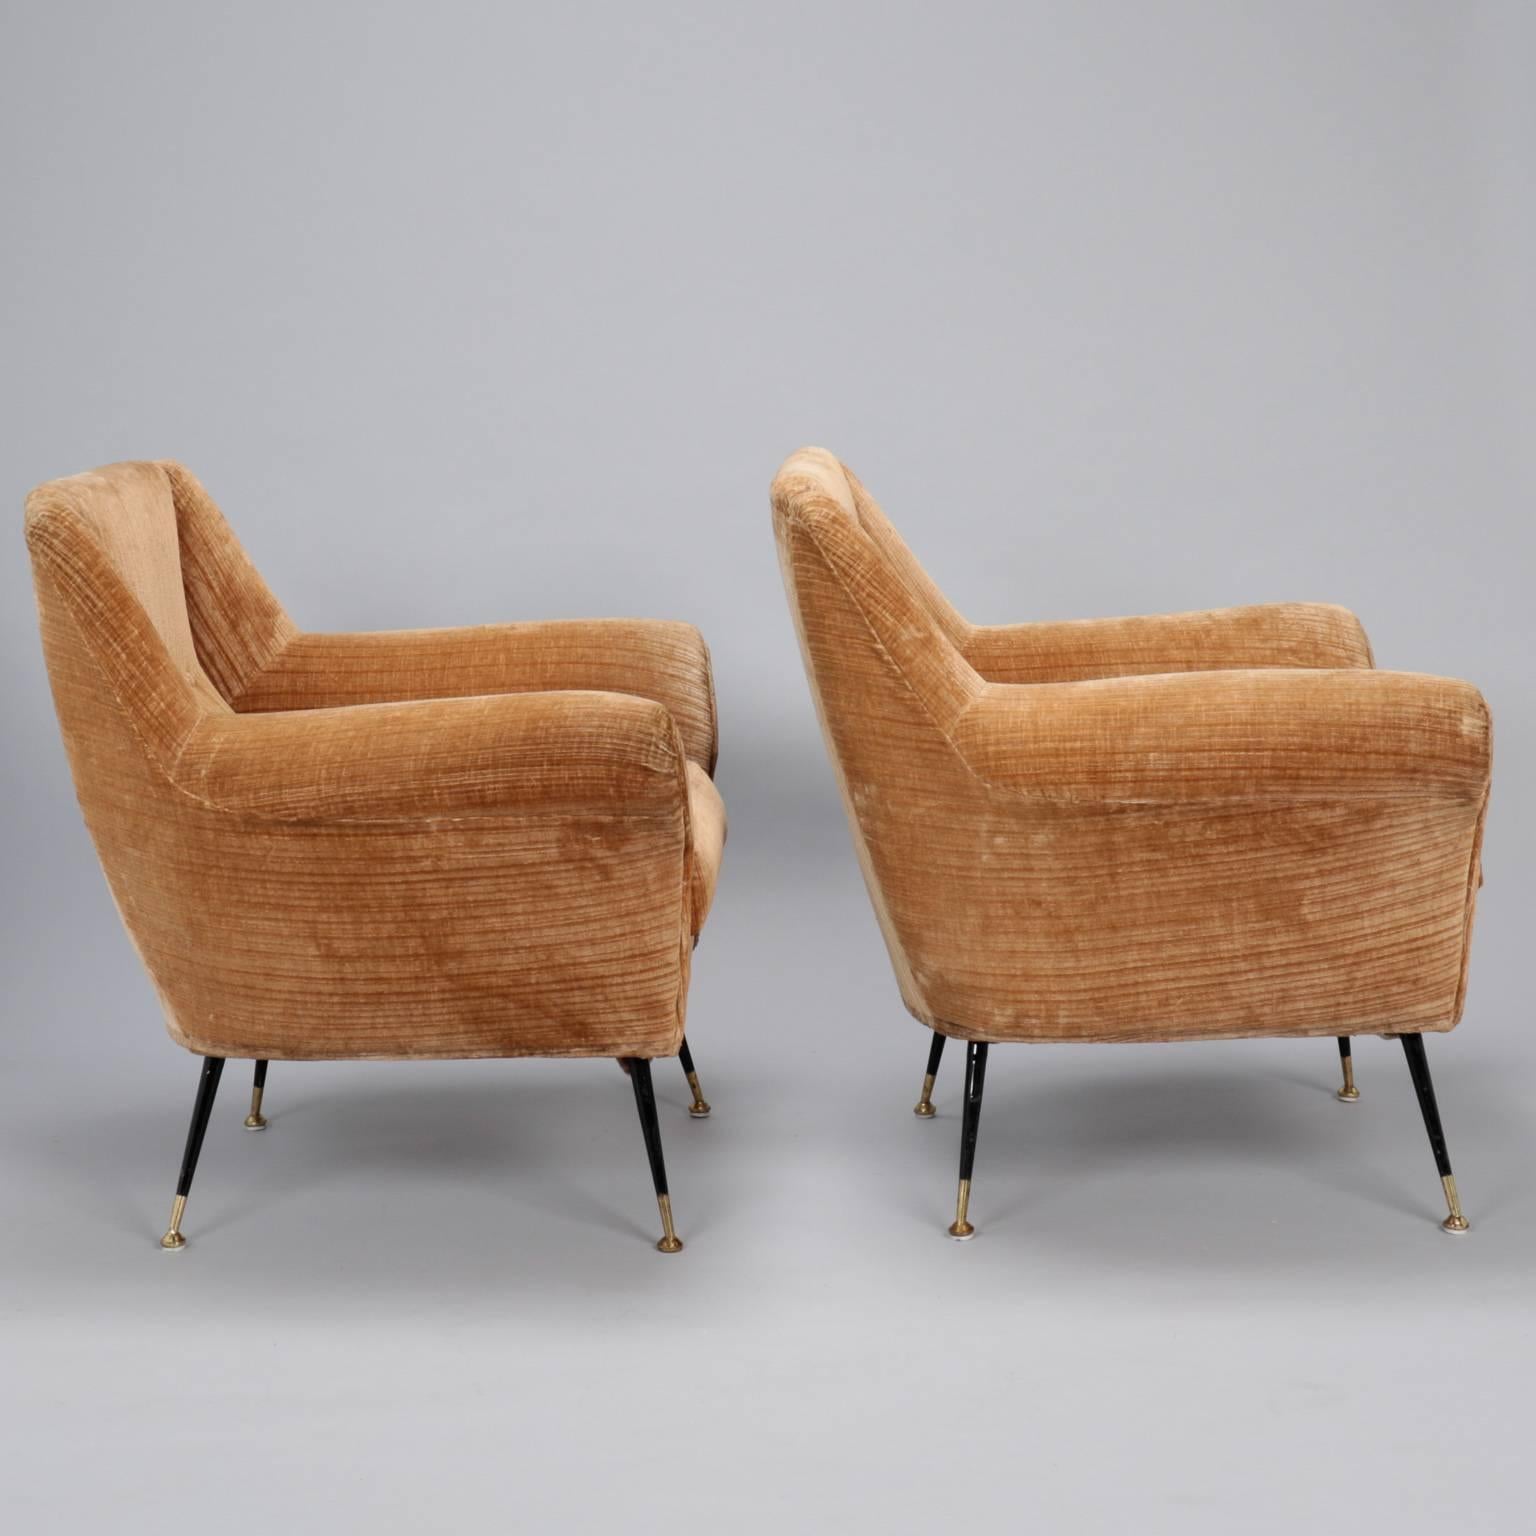 Italian armchairs with tan velvet upholstery, circa 1950s attributed to Gigi Radice for Minotti. Curvy lines, single line of button tufting on seat backs, thin black iron legs with brass caps. Two available at time of posting - Sold and priced as a